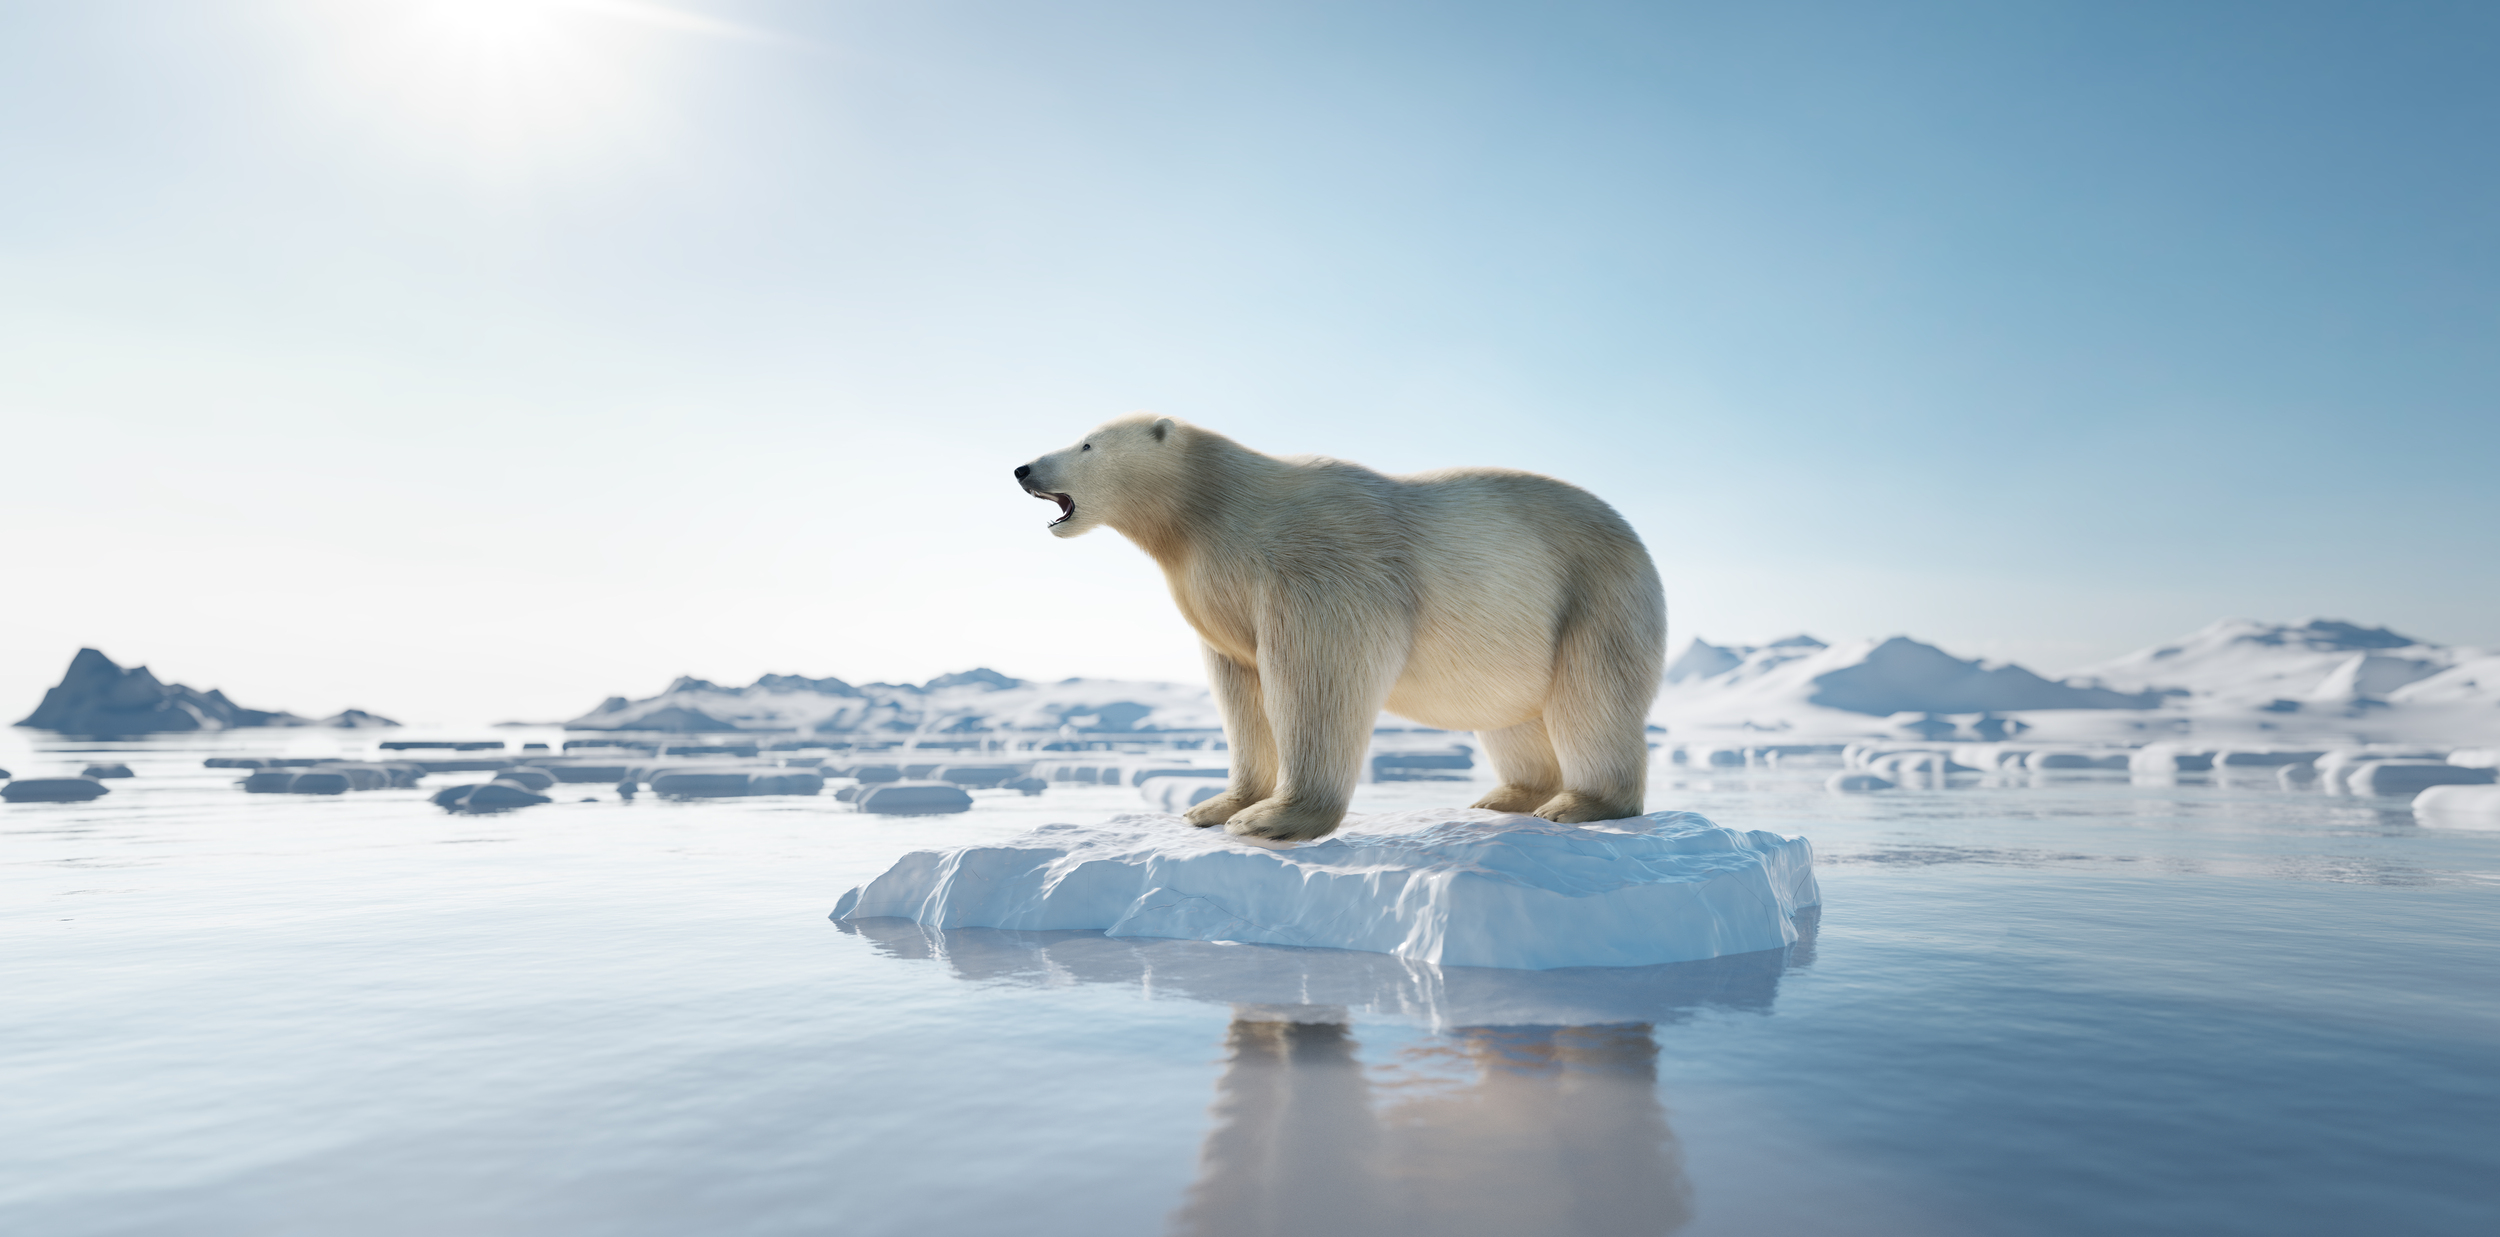 The polar bear has become a symbol for the climate crisis as sea ice melts at a rapid rate due to global temperature increase. Image Credit: Photocreo, Envato Elements.